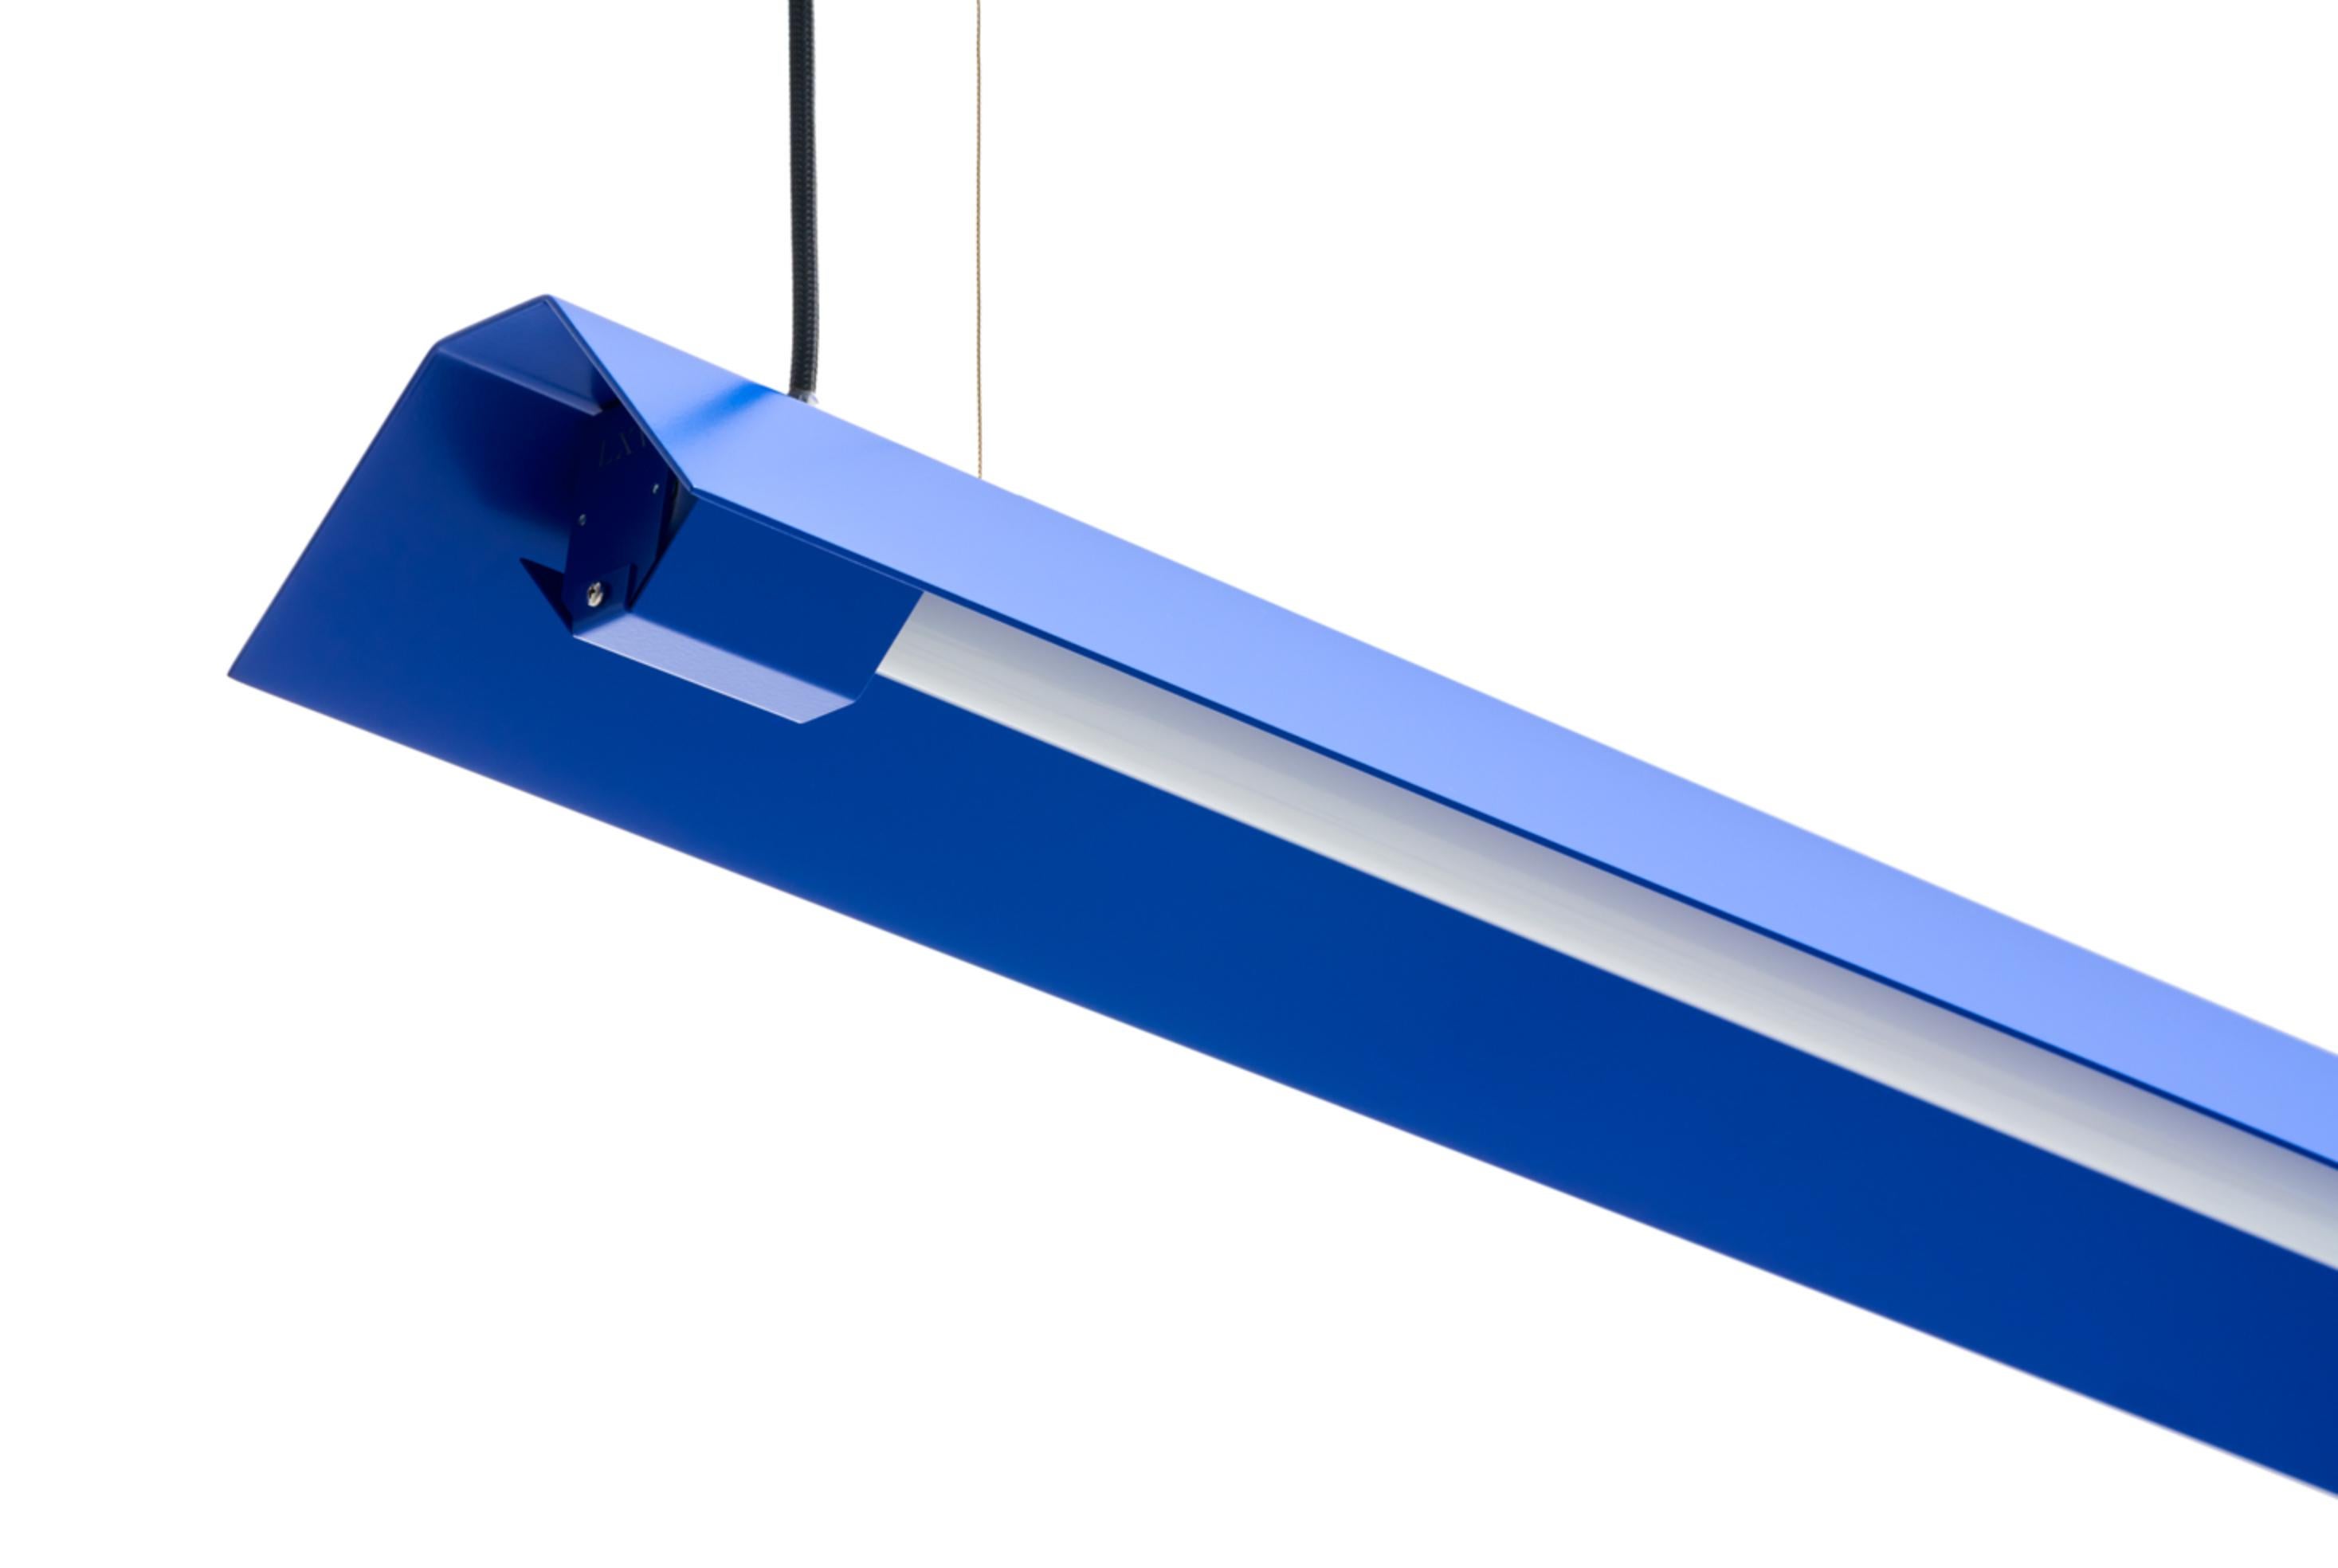 Medium Misalliance Ral Ultramarine suspended light by Lexavala
Dimensions: D 16 x W 100 x H 8 cm
Materials: powder coated aluminium.

There are two lenghts of socket covers, extending over the LED. Two short are to be found in Suspended and